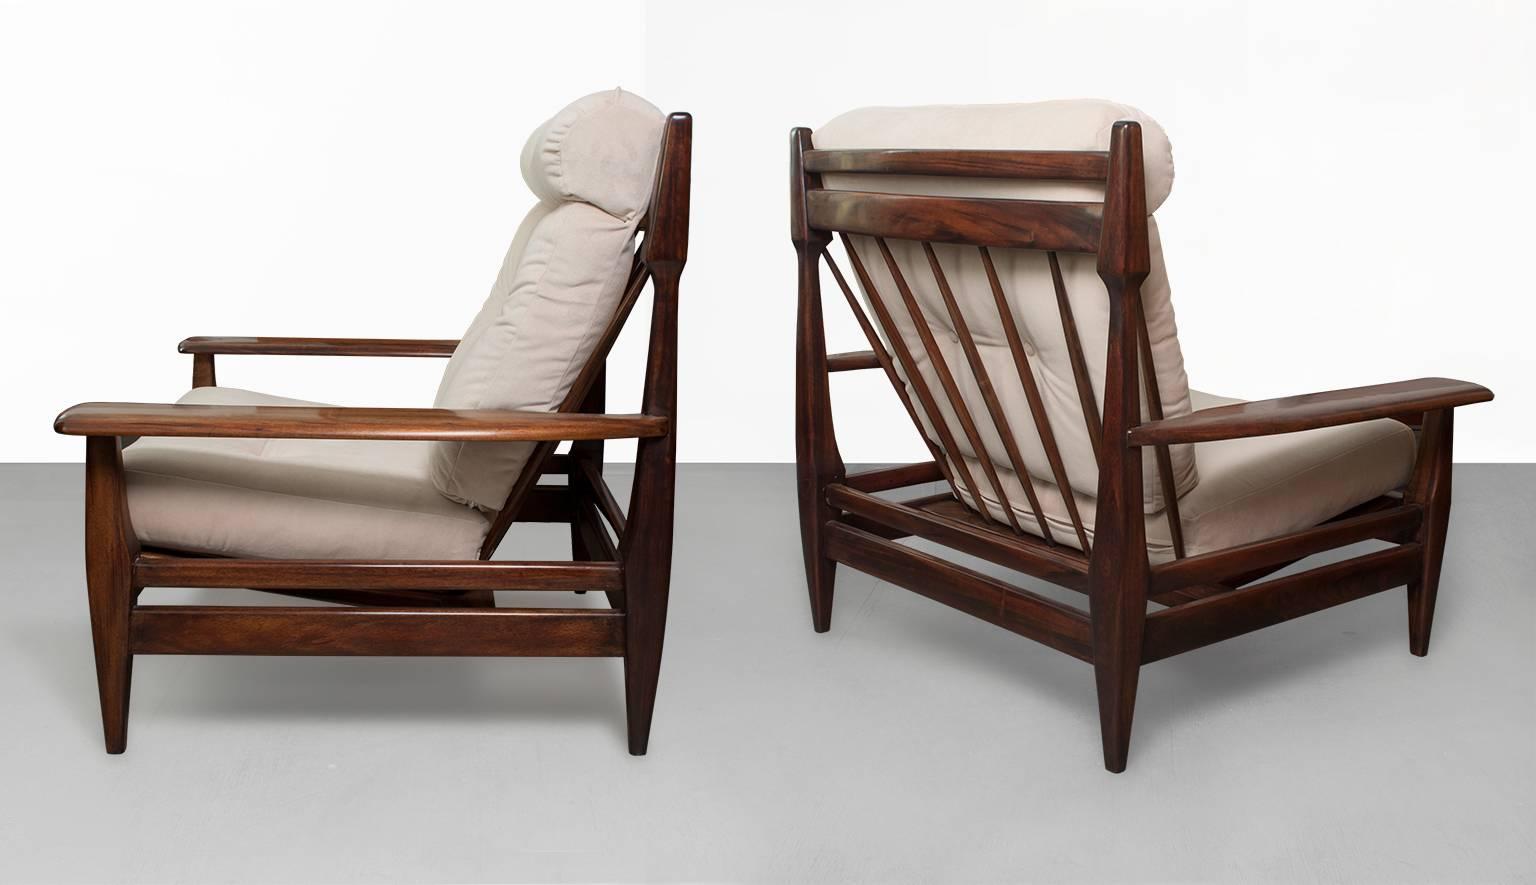 Large pair of Mid-Century carved solid rosewood lounge chairs from Brazil. The chairs balance bold sculpted shapes with lighter structural elements. Lightly restored, new upholstery in excellent condition.
 
Measures: Height 36